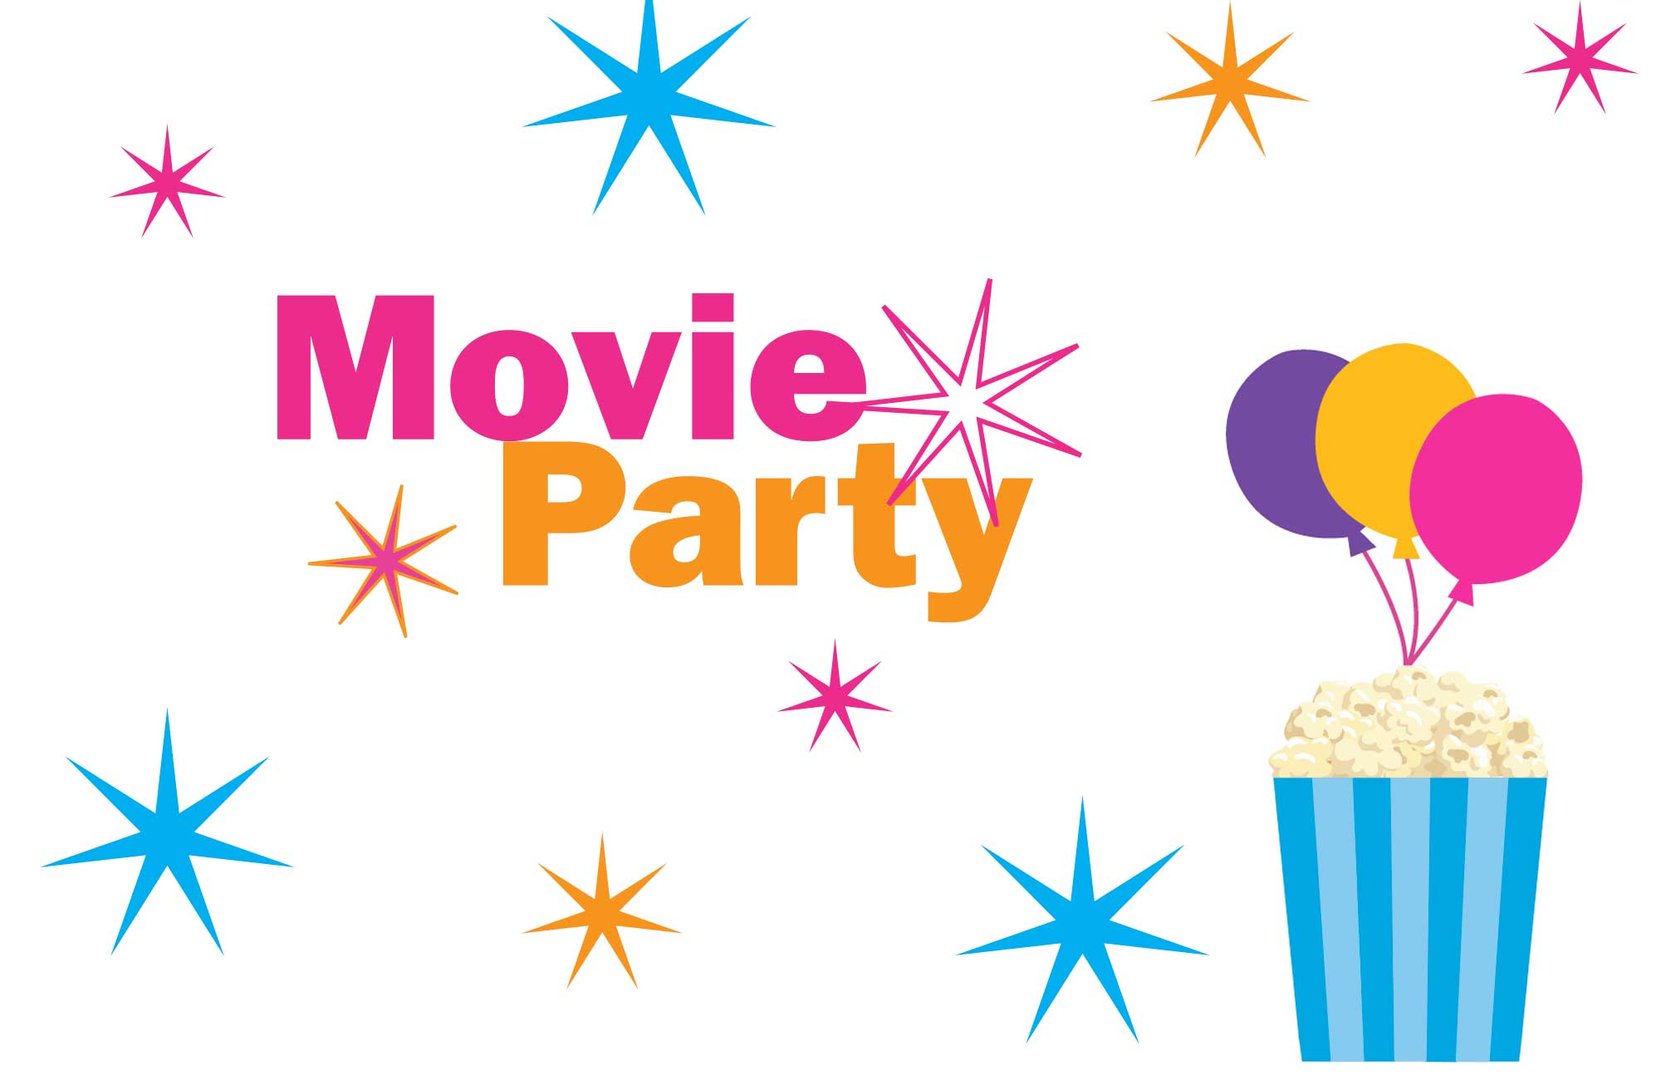 Celebrate your special day with the movie stars!